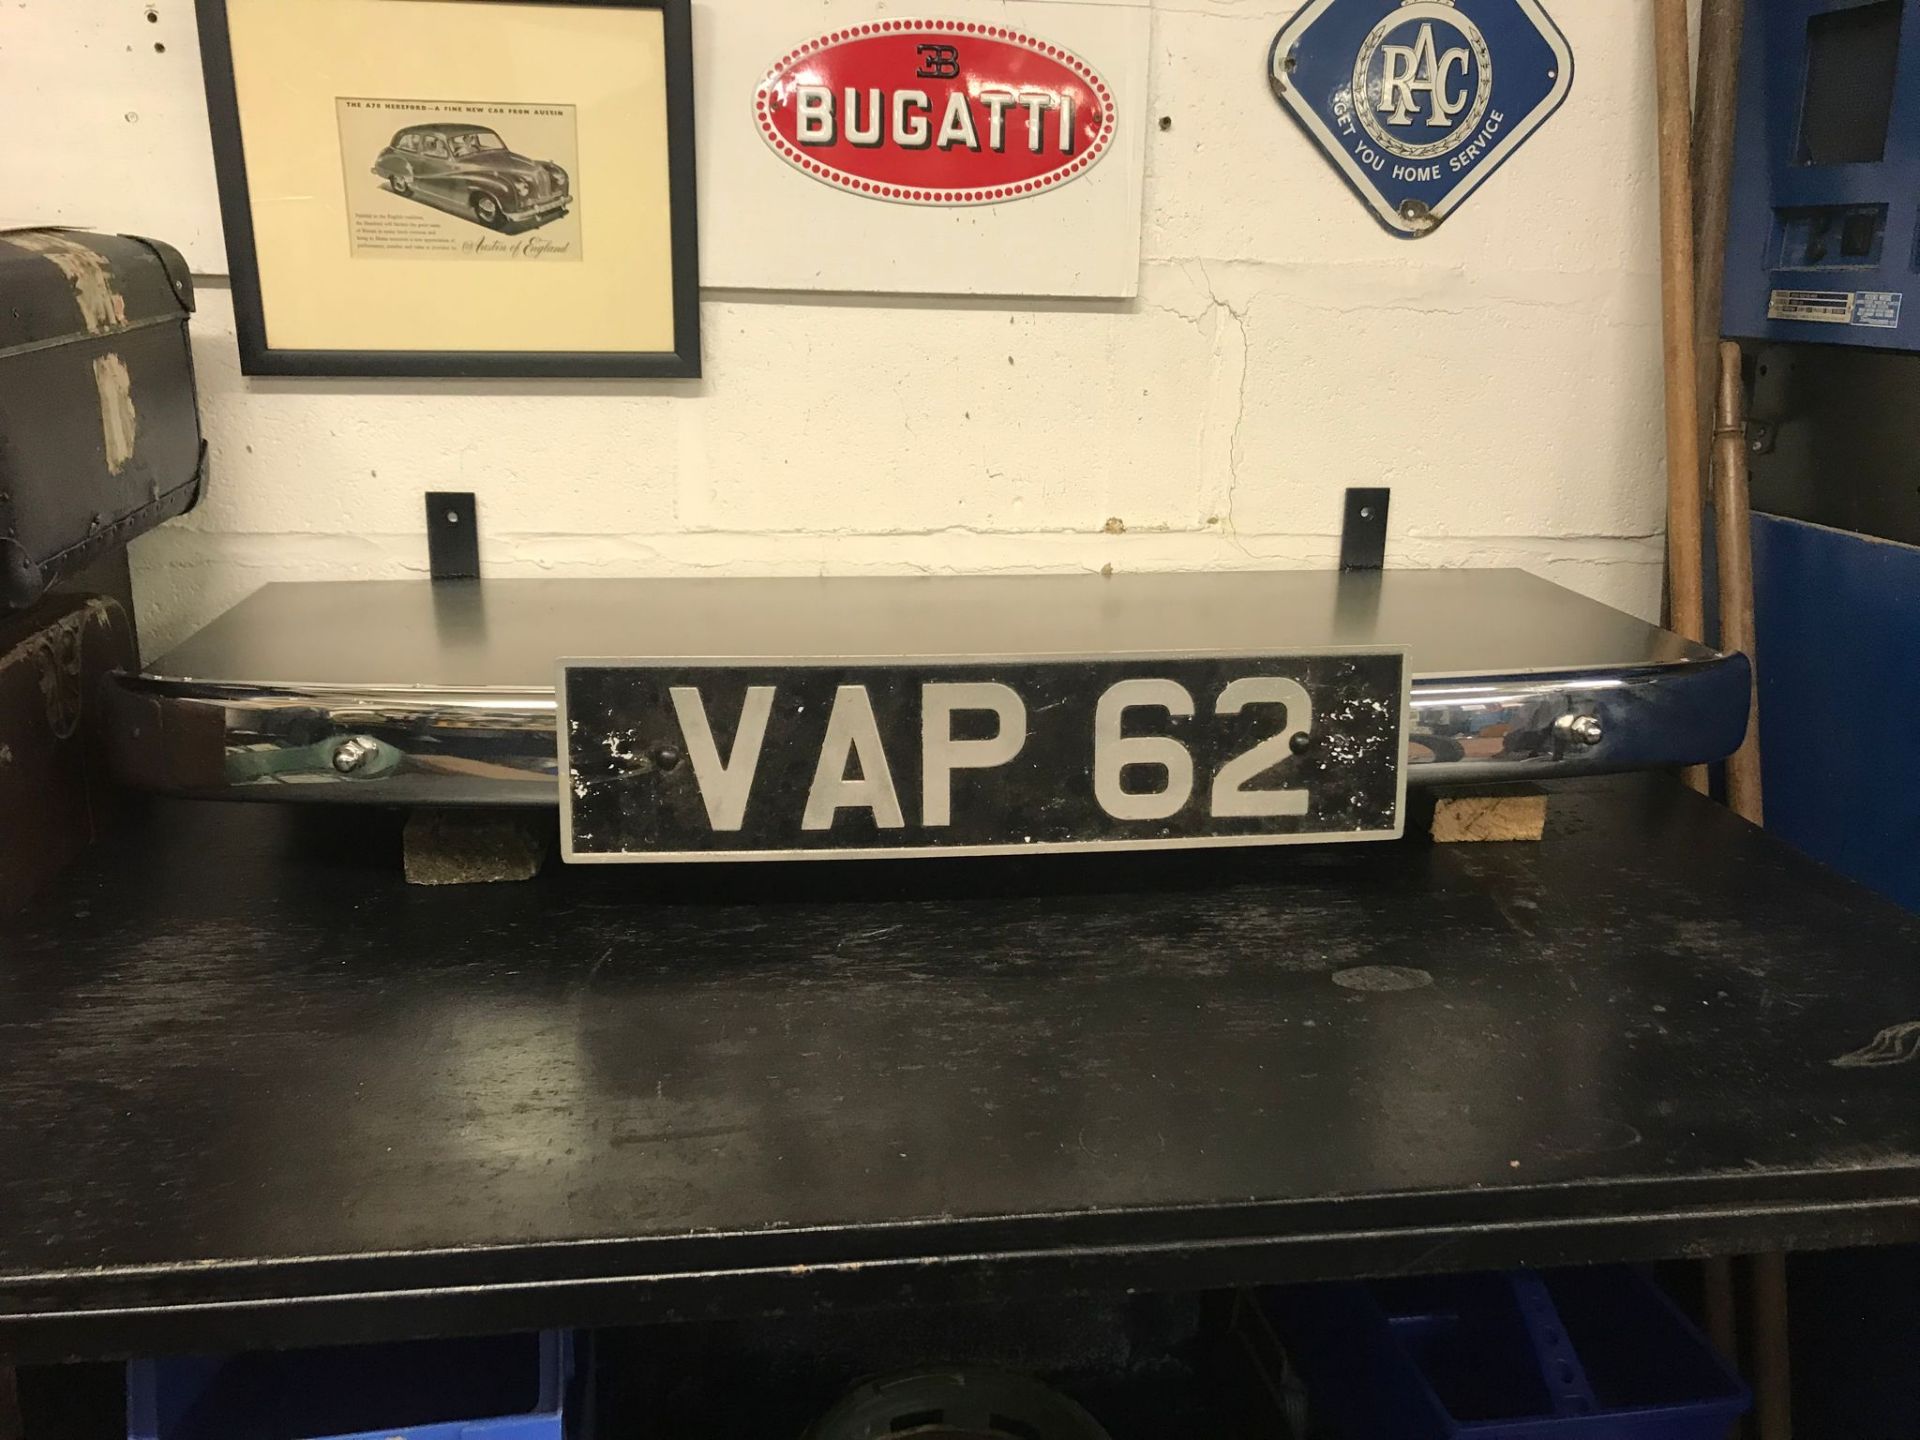 A superb man-cave shelf formed from a vintage chrome bumper and plate.